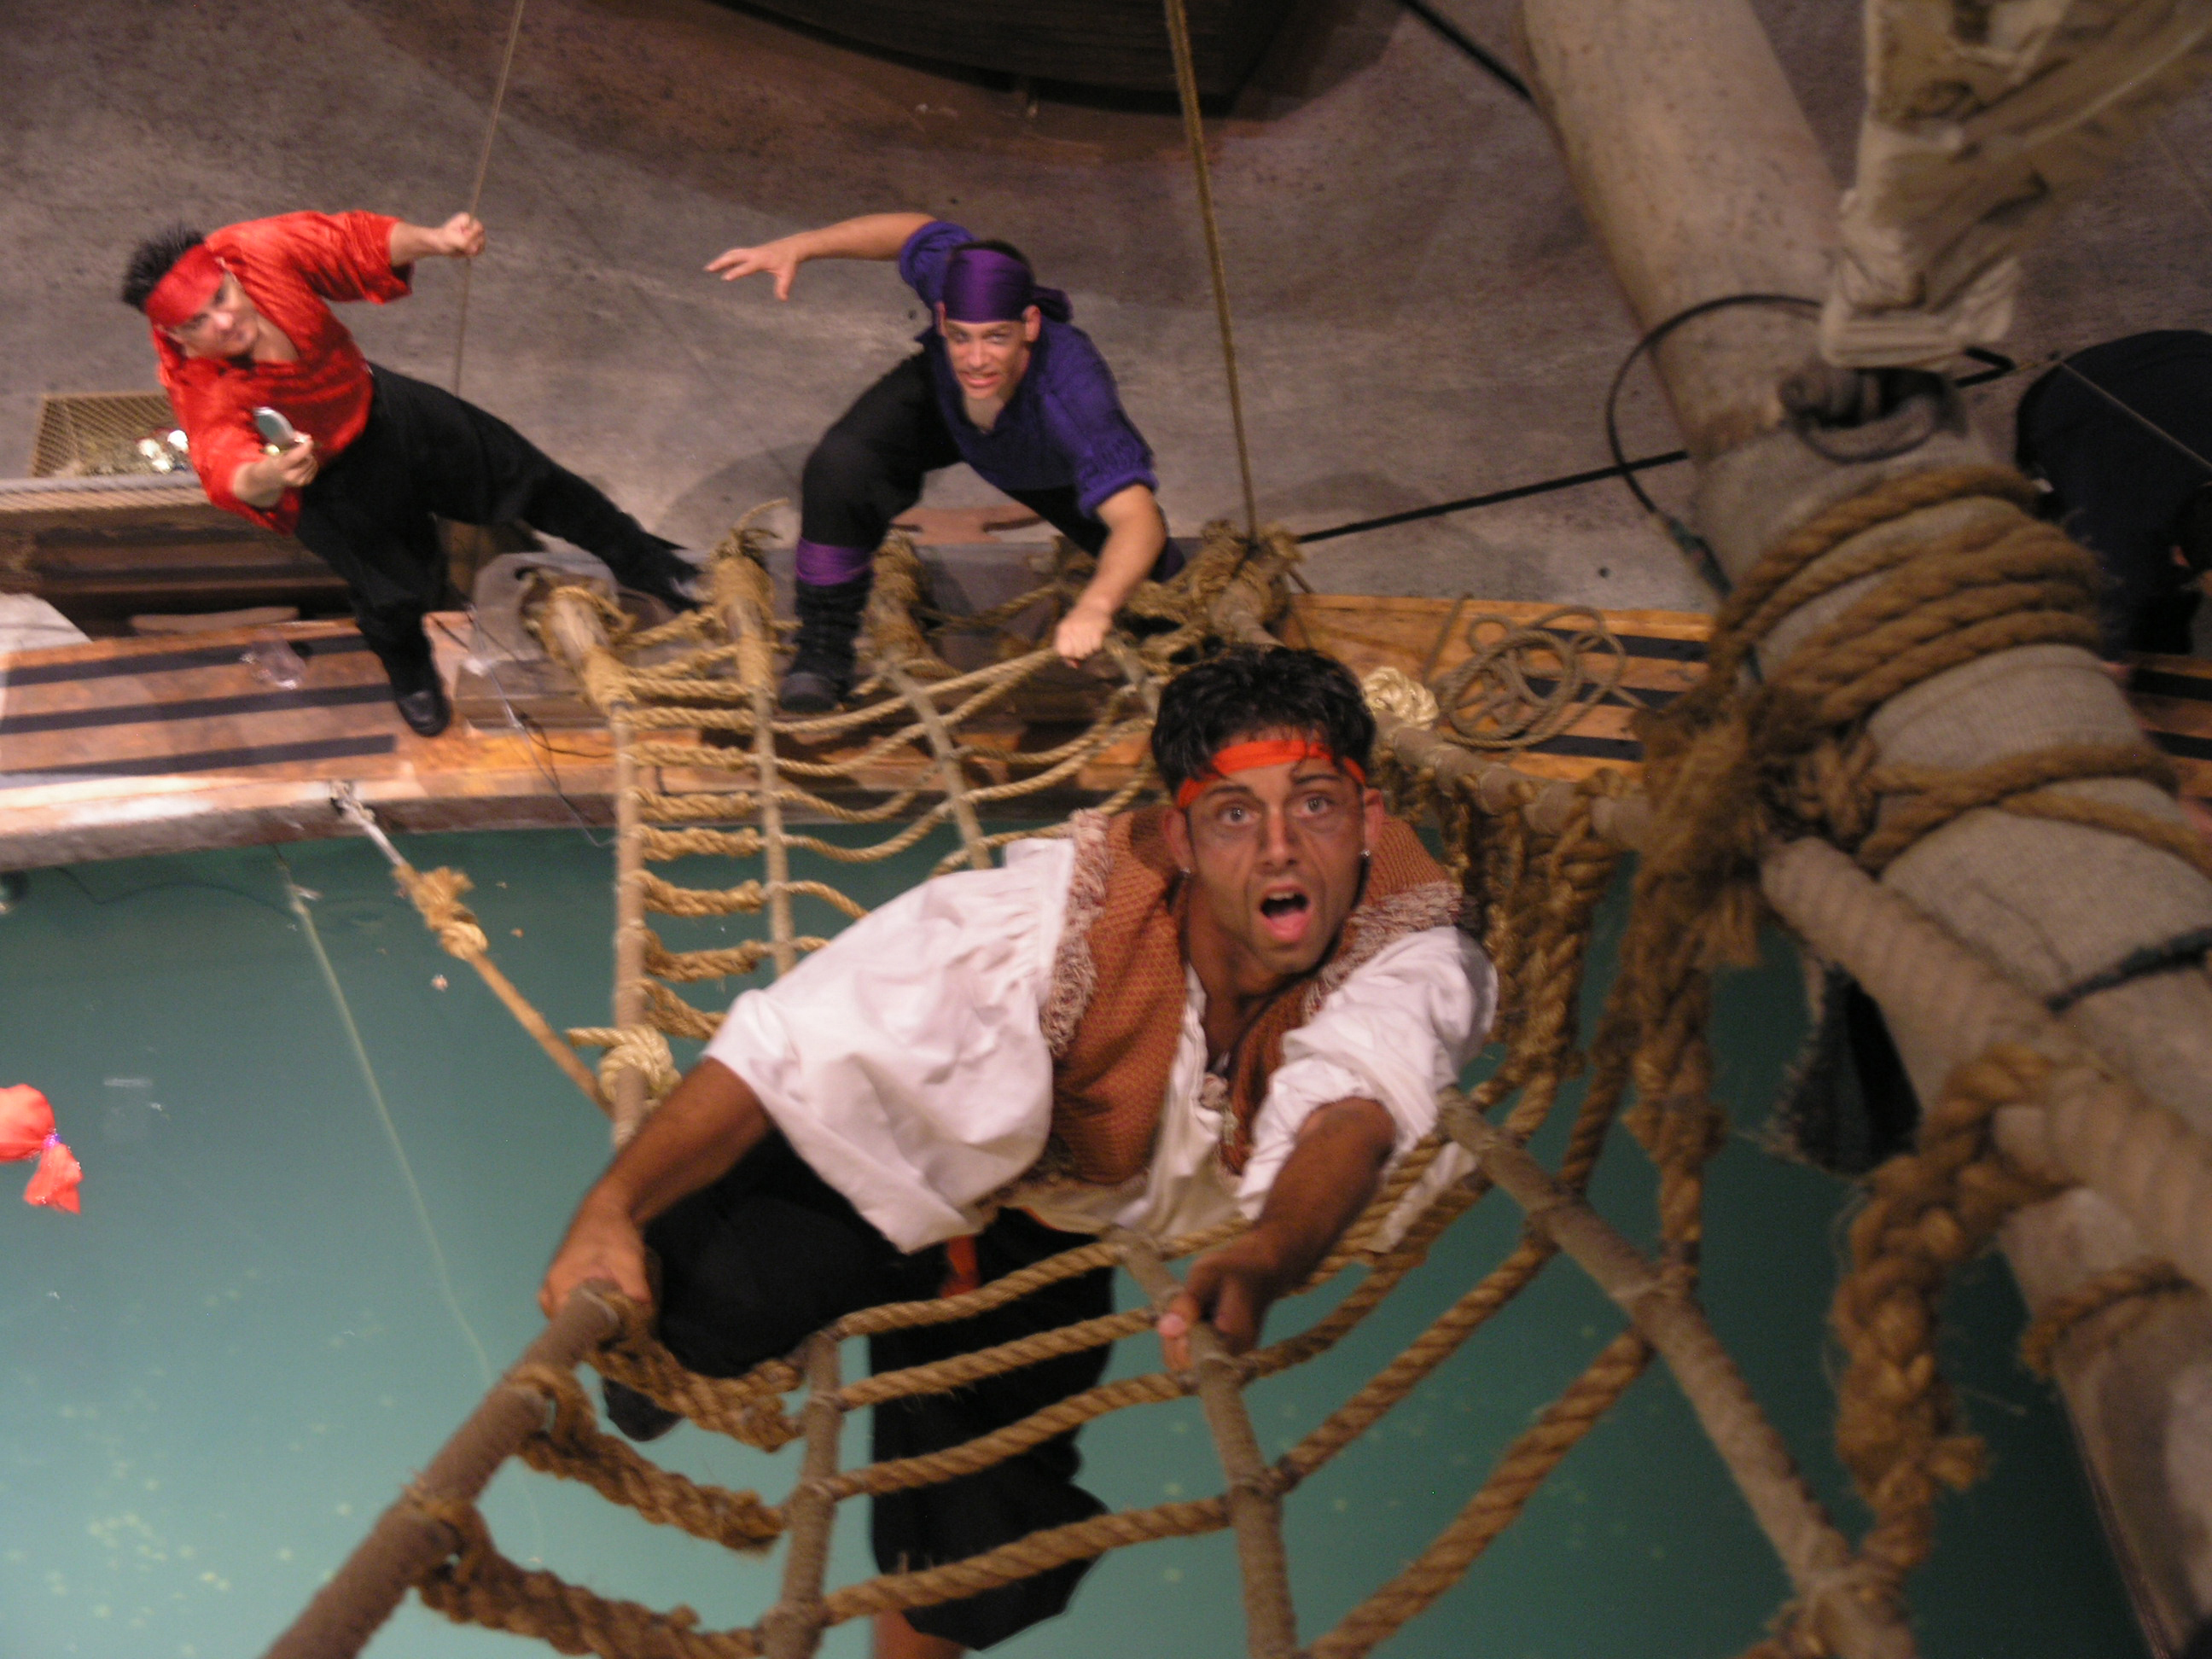 Pirates dinner adventure pirates perform daring stunts. Get groups discount tickets for pirates dinner and show with orlando group getaways.